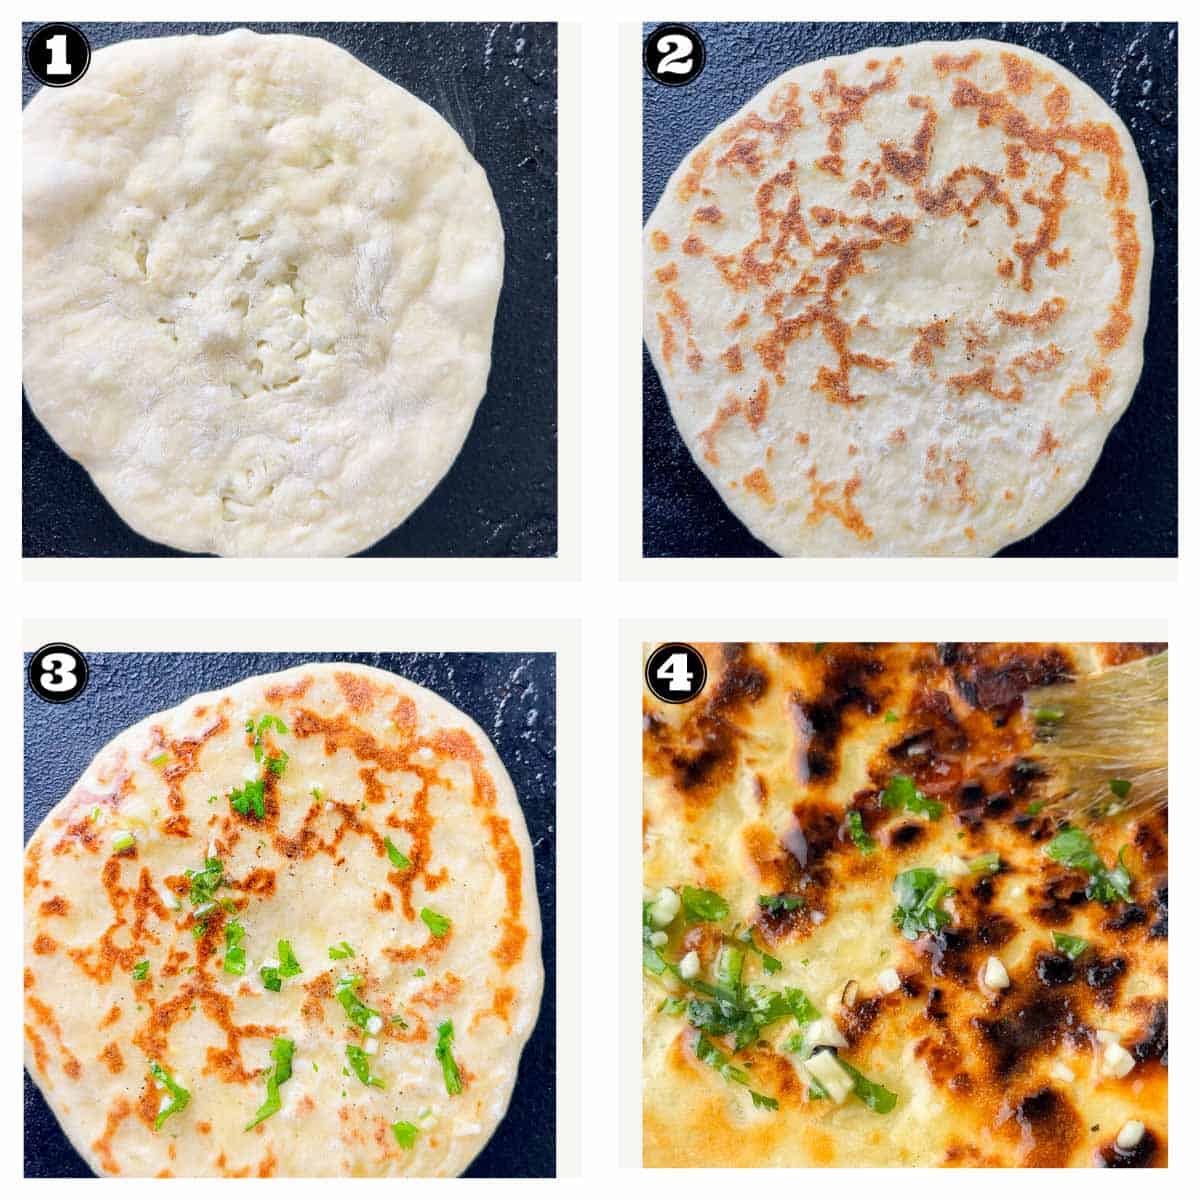 unlike traditional ways we are cooking the naan on skillet. These images shows process of cooking naan bread